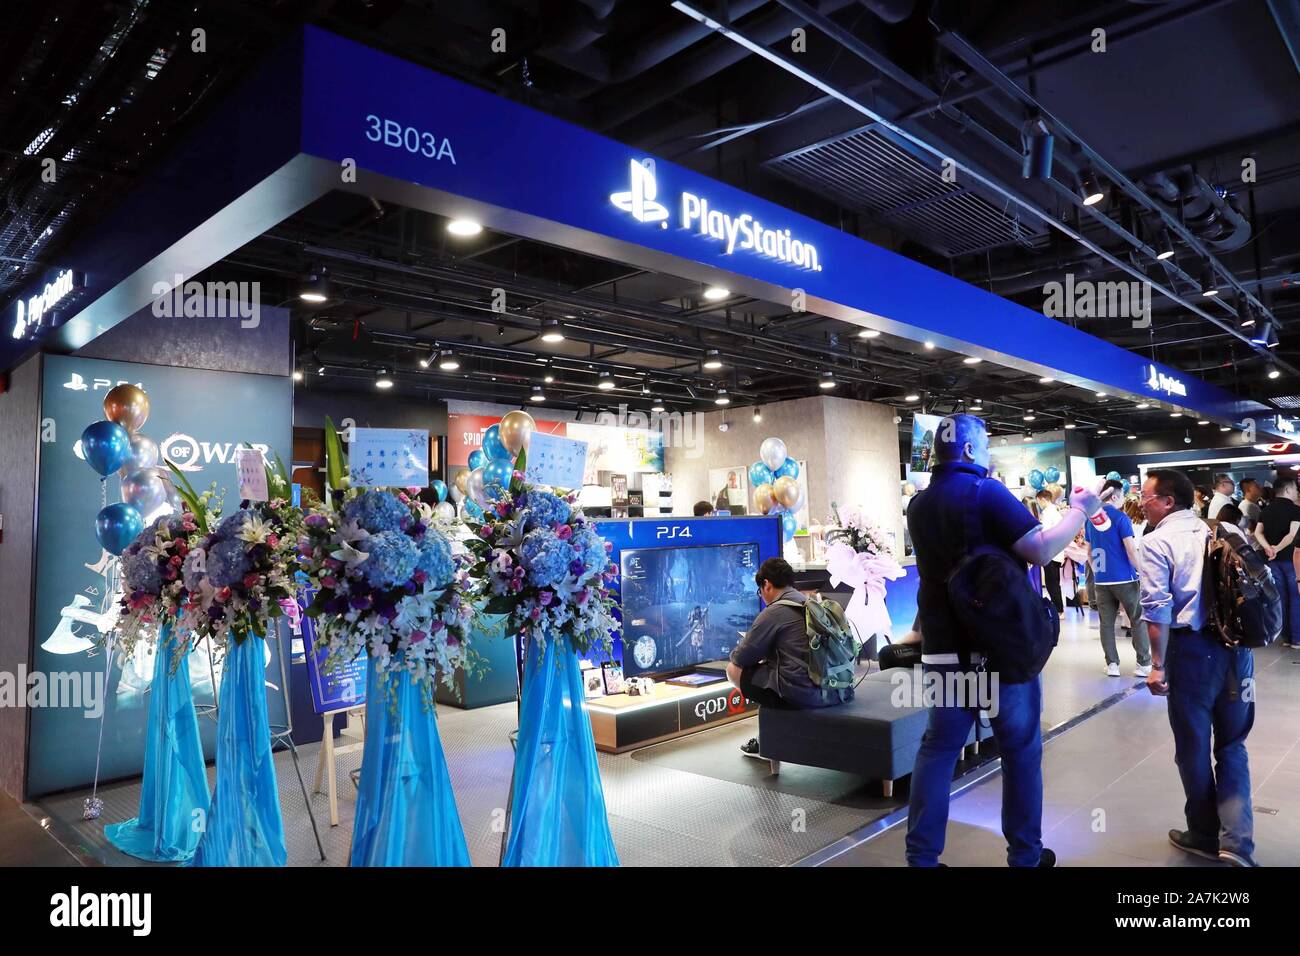 An official store of PlayStation, a video gaming brand that consists of  four home video game consoles, opens in Shanghai, China, 23 September 2019.  ** Stock Photo - Alamy